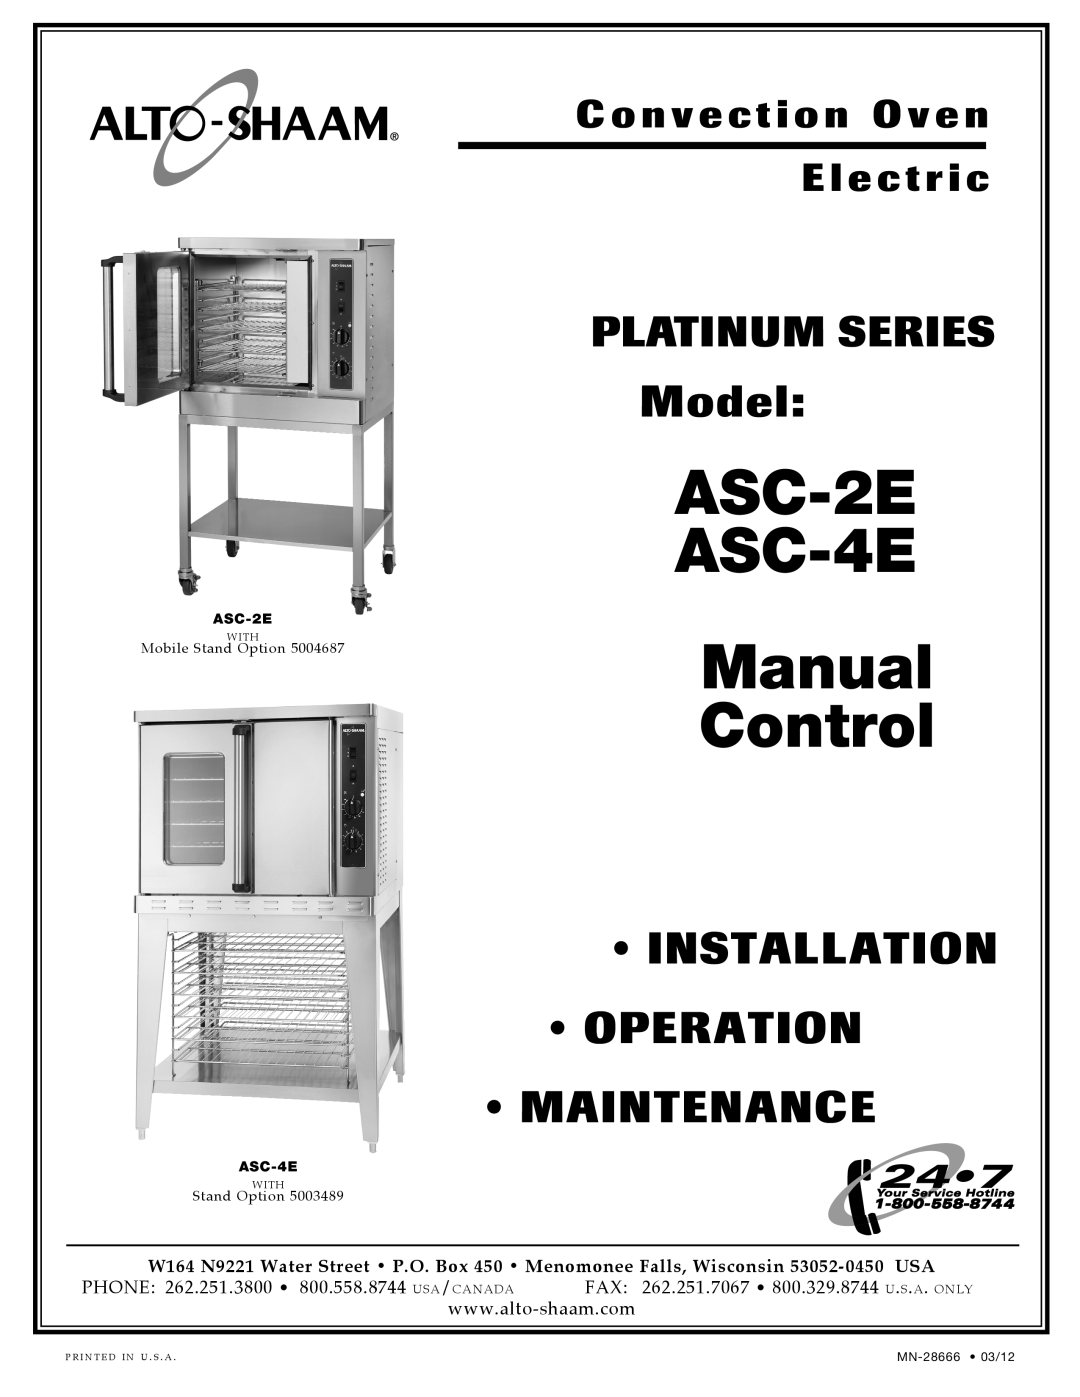 Alto-Shaam ASC-2E specifications Electric Convec Tion Oven, Factory Installed Options, Additional Features, Item No 